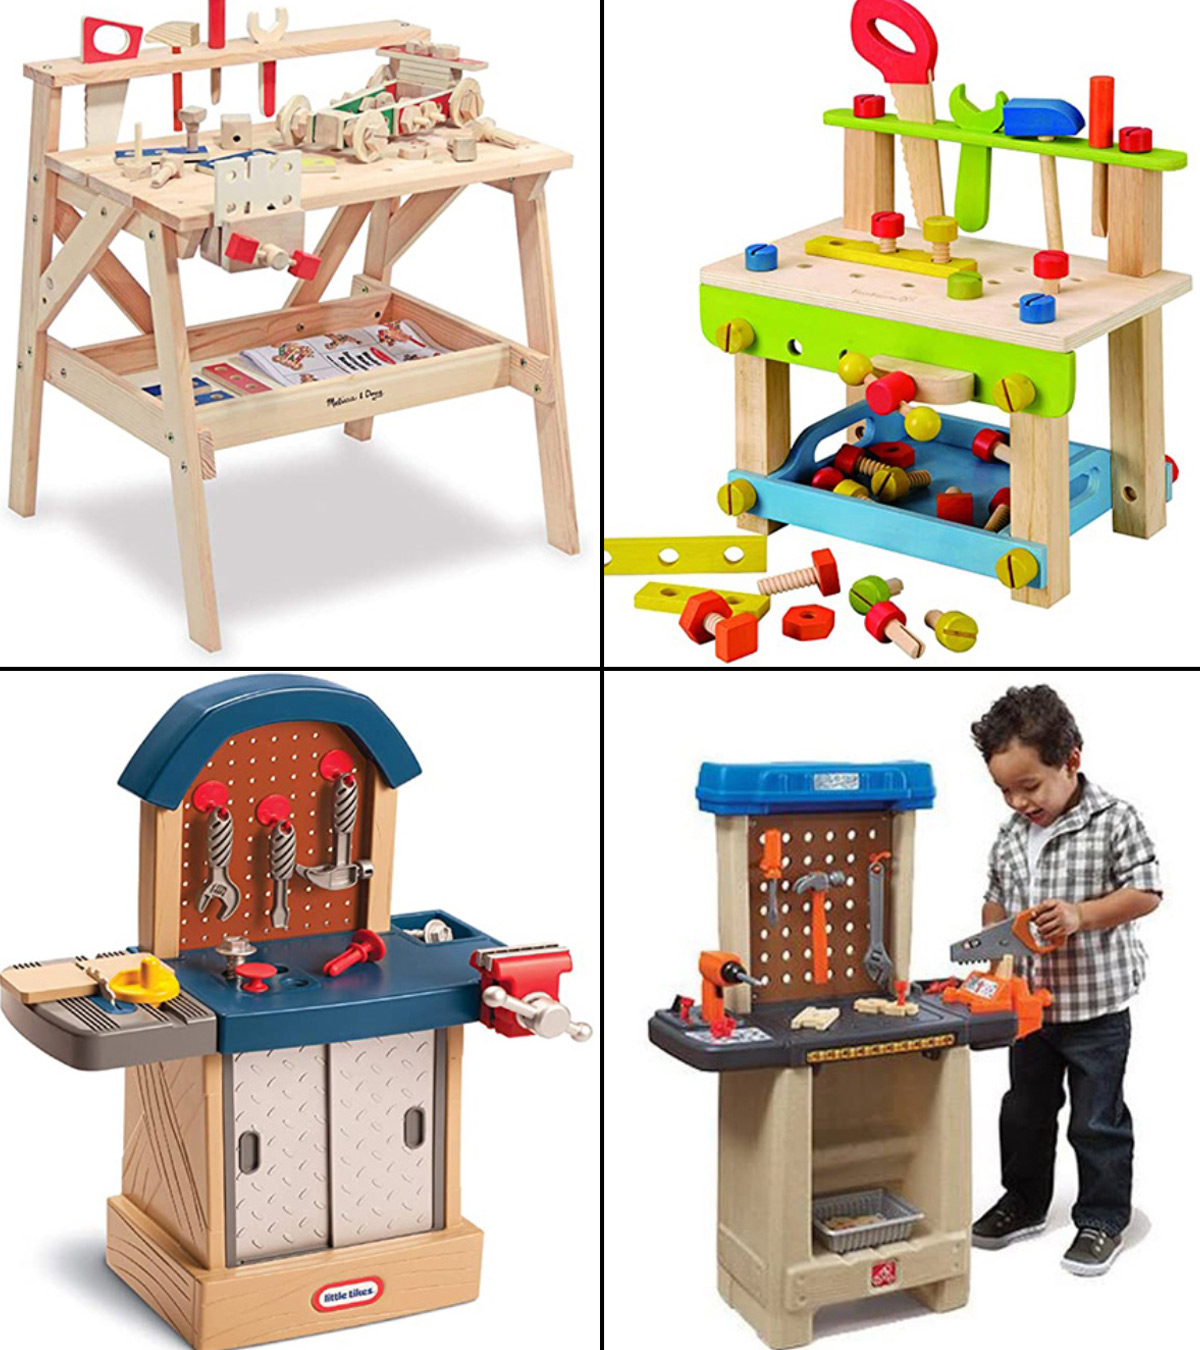  4 in 1 Woodworking Station for Kids - Wood Building